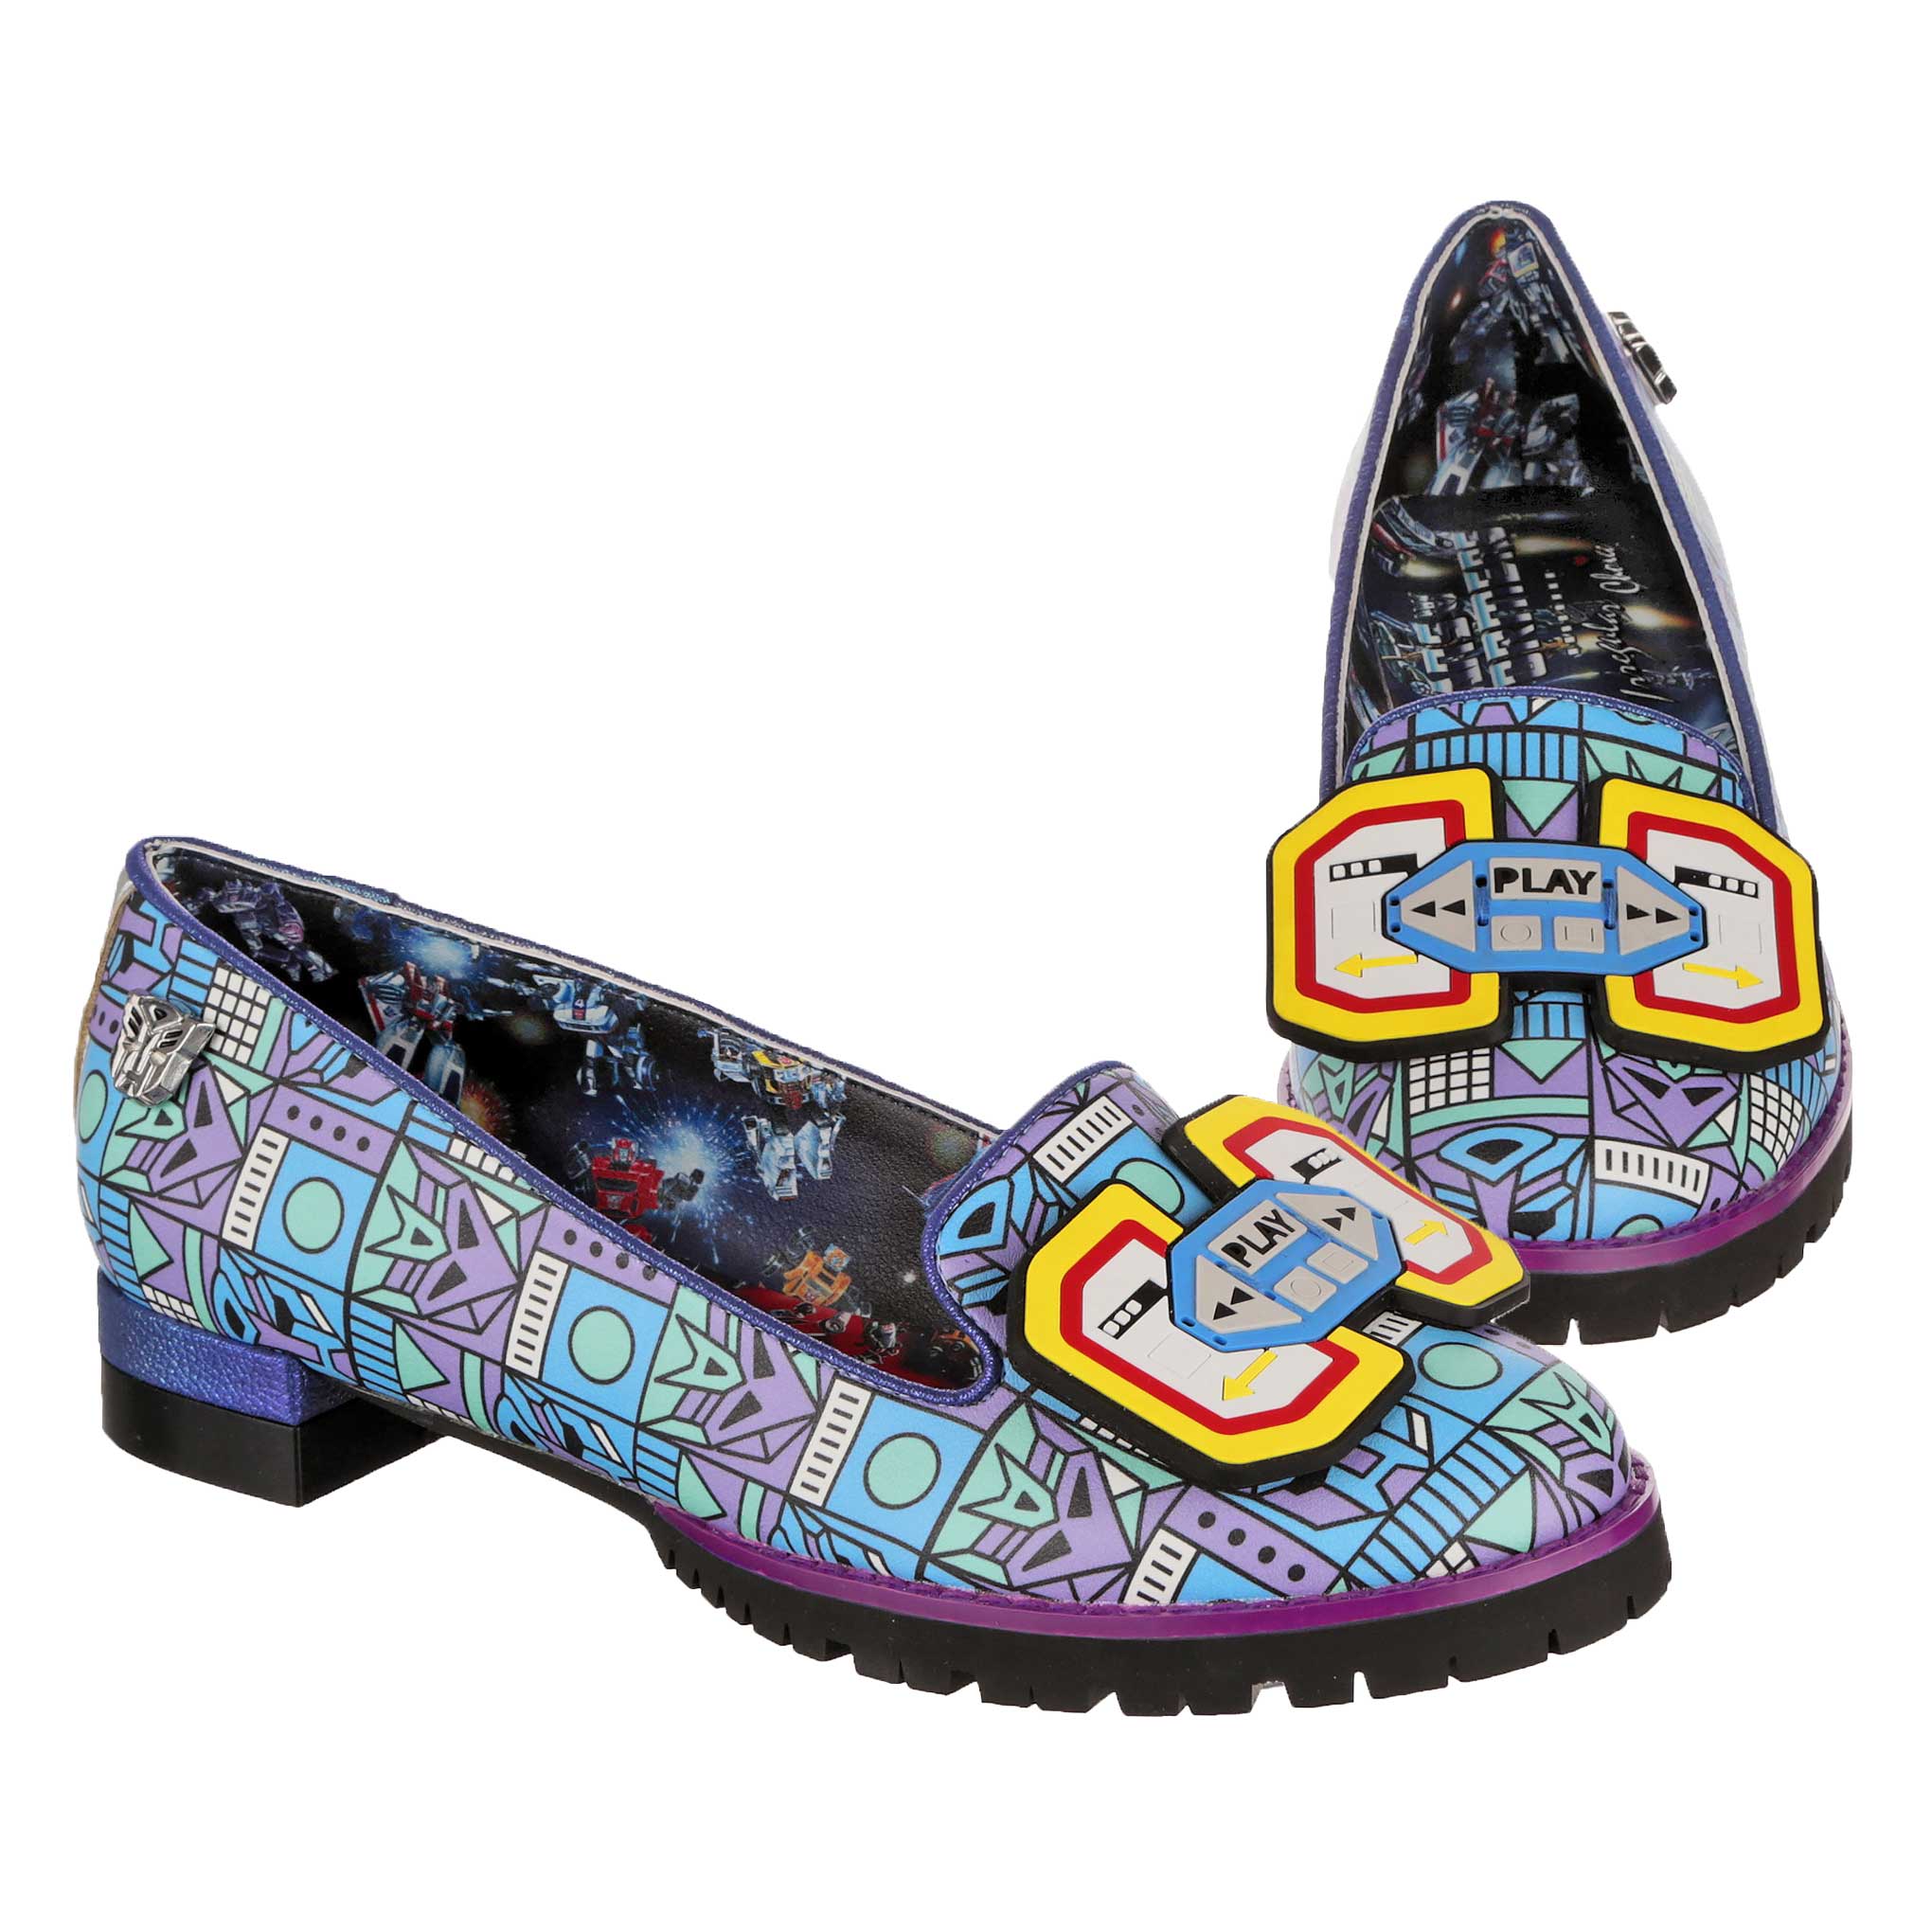 A pair of Synthwave Transformers themed blue ballet pumps featuring a retro pixal art print with Autobot and Soundwave logos on. A Transformers print lines the inside of the shoe showing Transformers battling in space. A rubber Play and stop cassette player decal sits on the toe of the shoe whilst black chunky soles finish off these slip-on flats. 